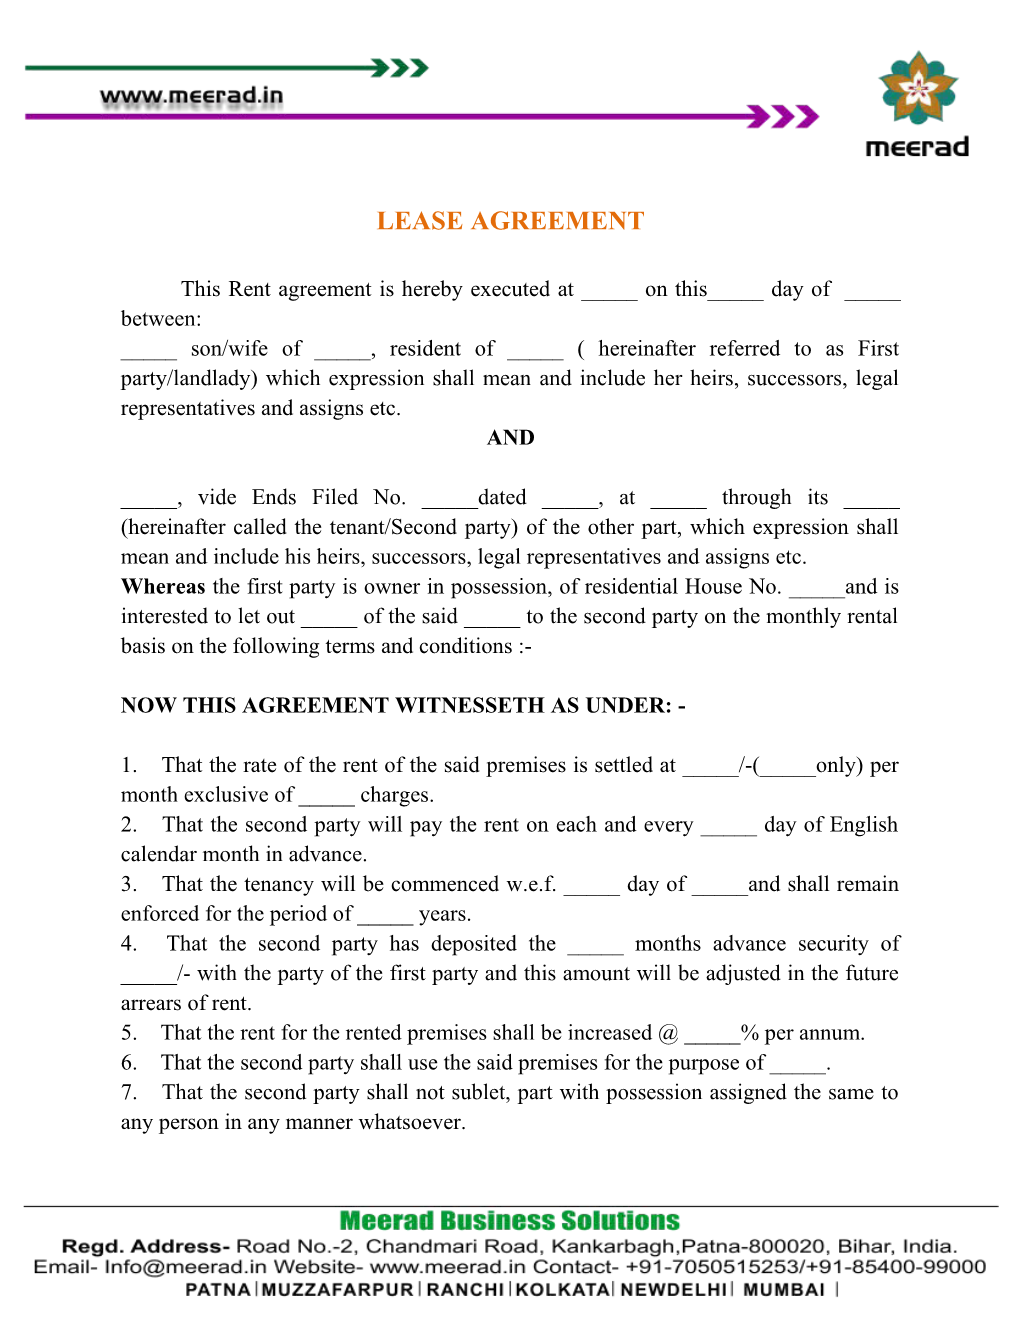 This Rent Agreement Is Hereby Executed at _____ on This_____ Day of _____ Between